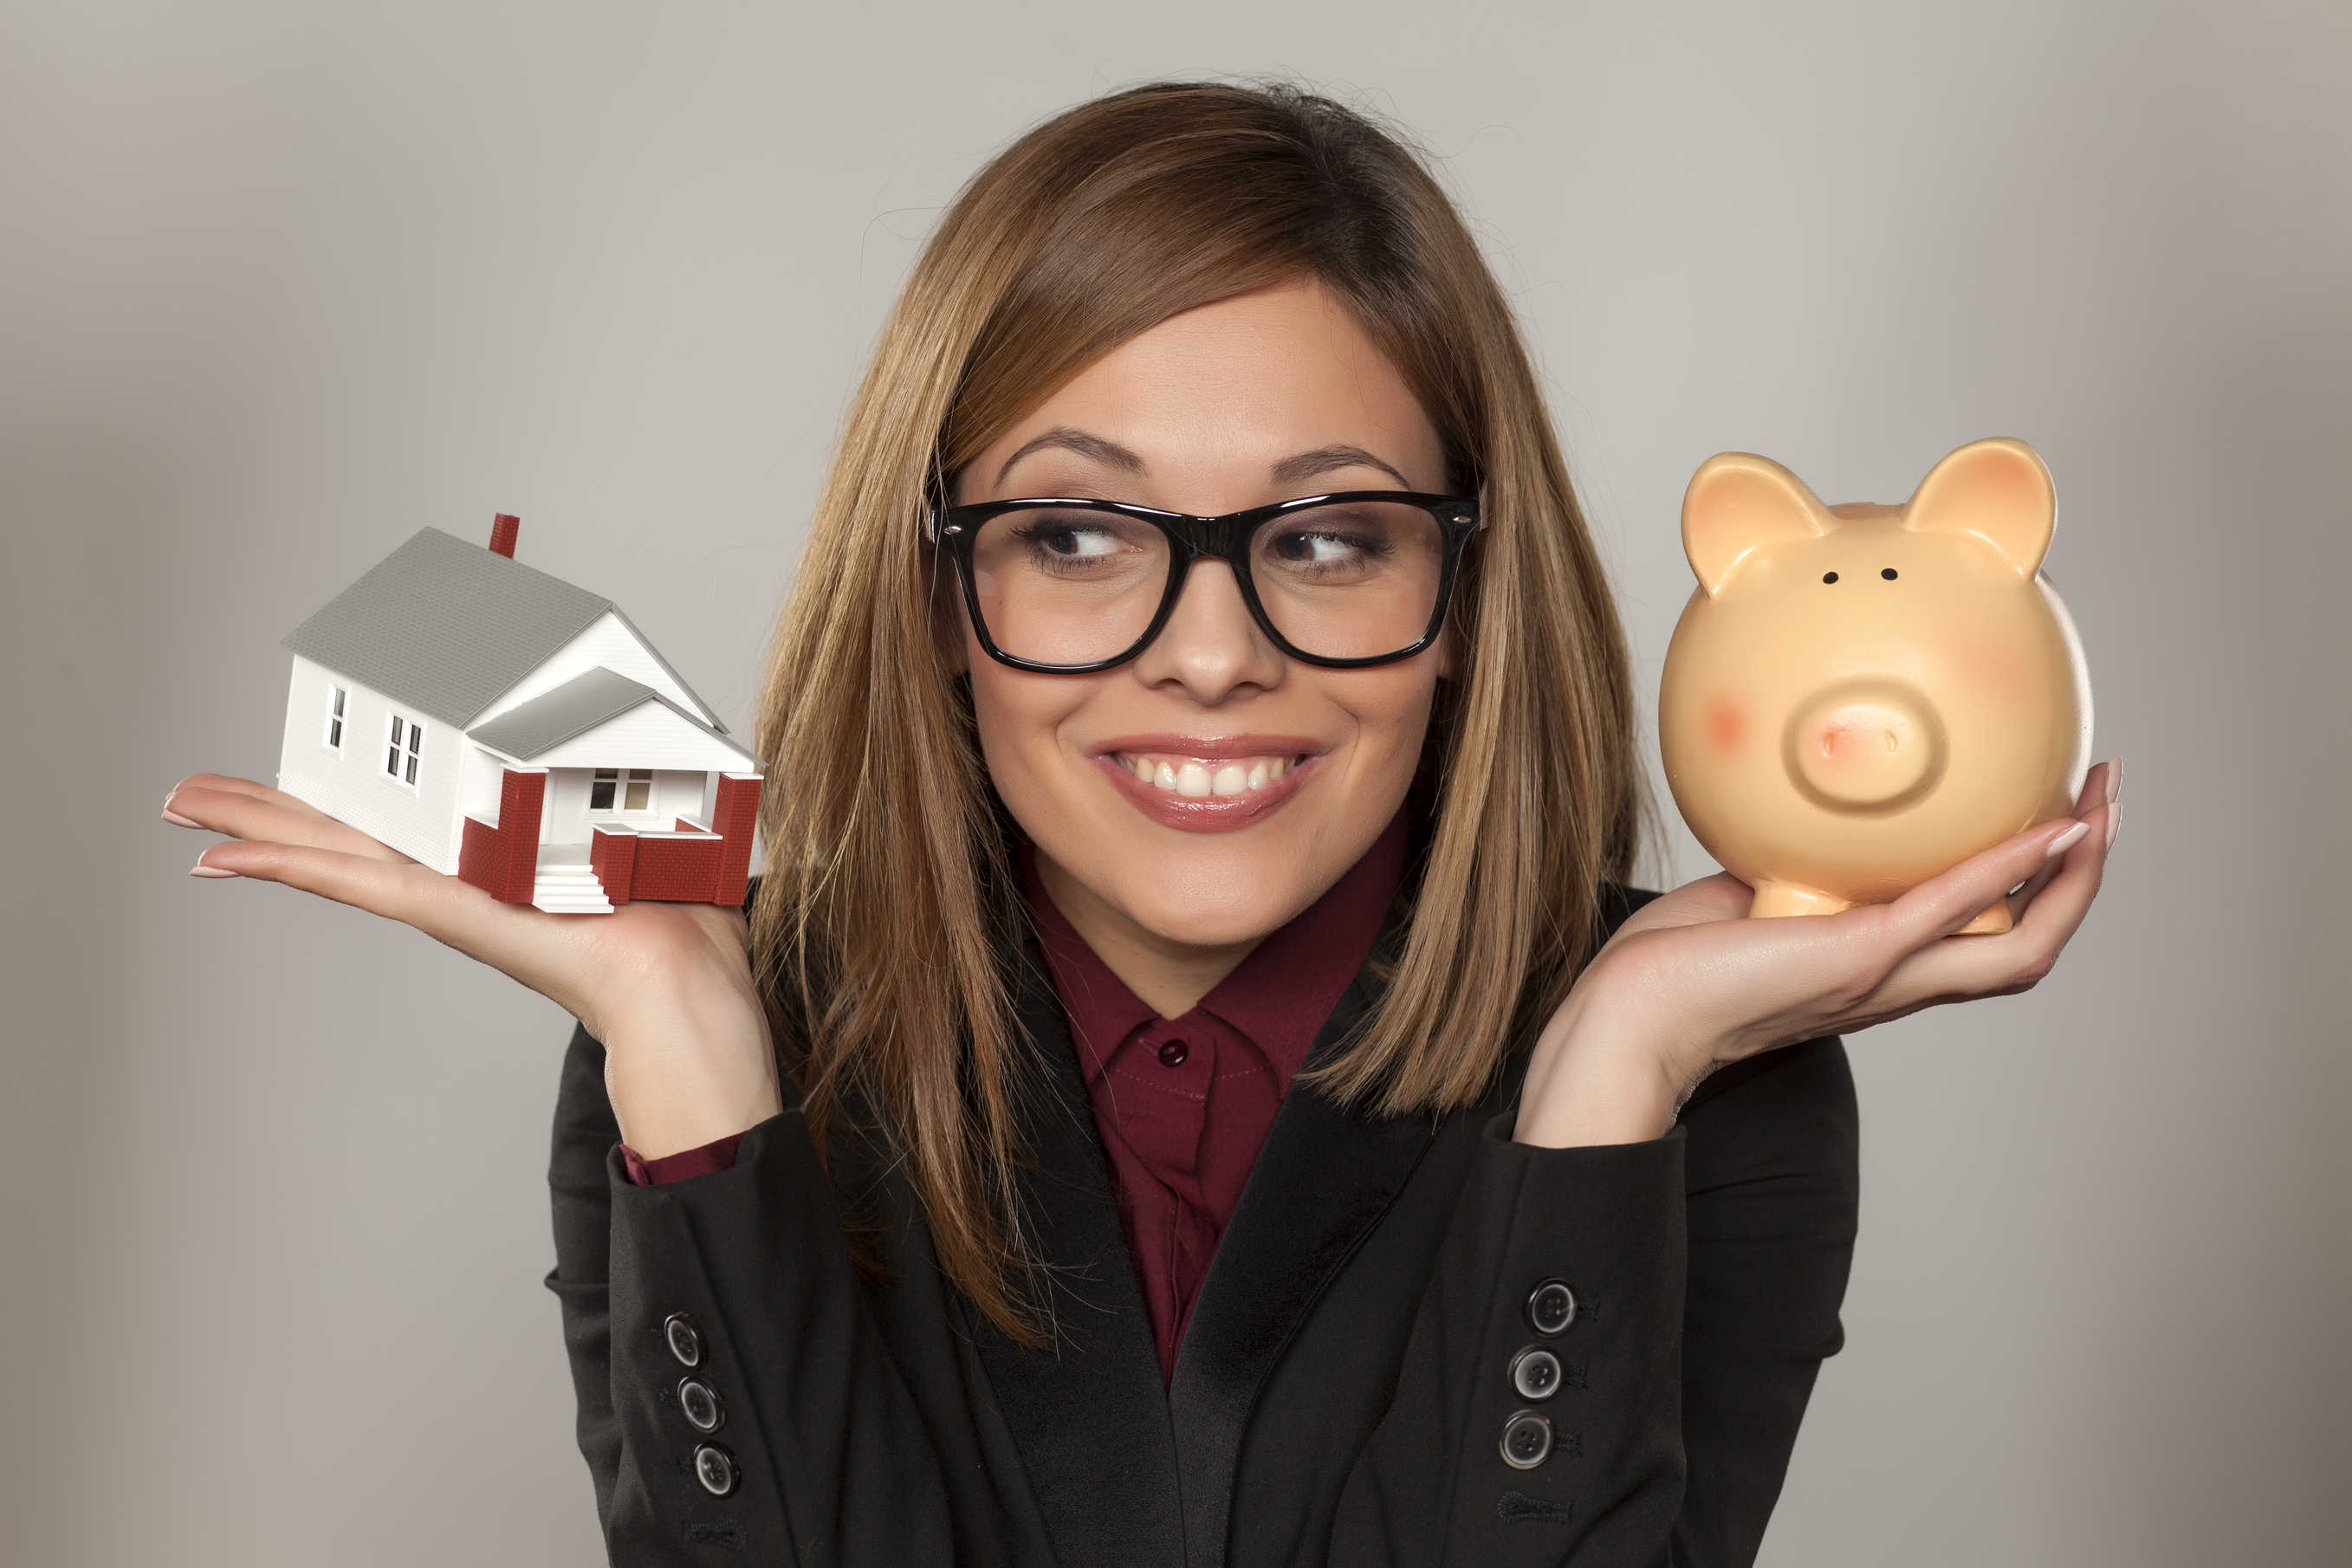 Am I better off renting or buying a home? – revisited